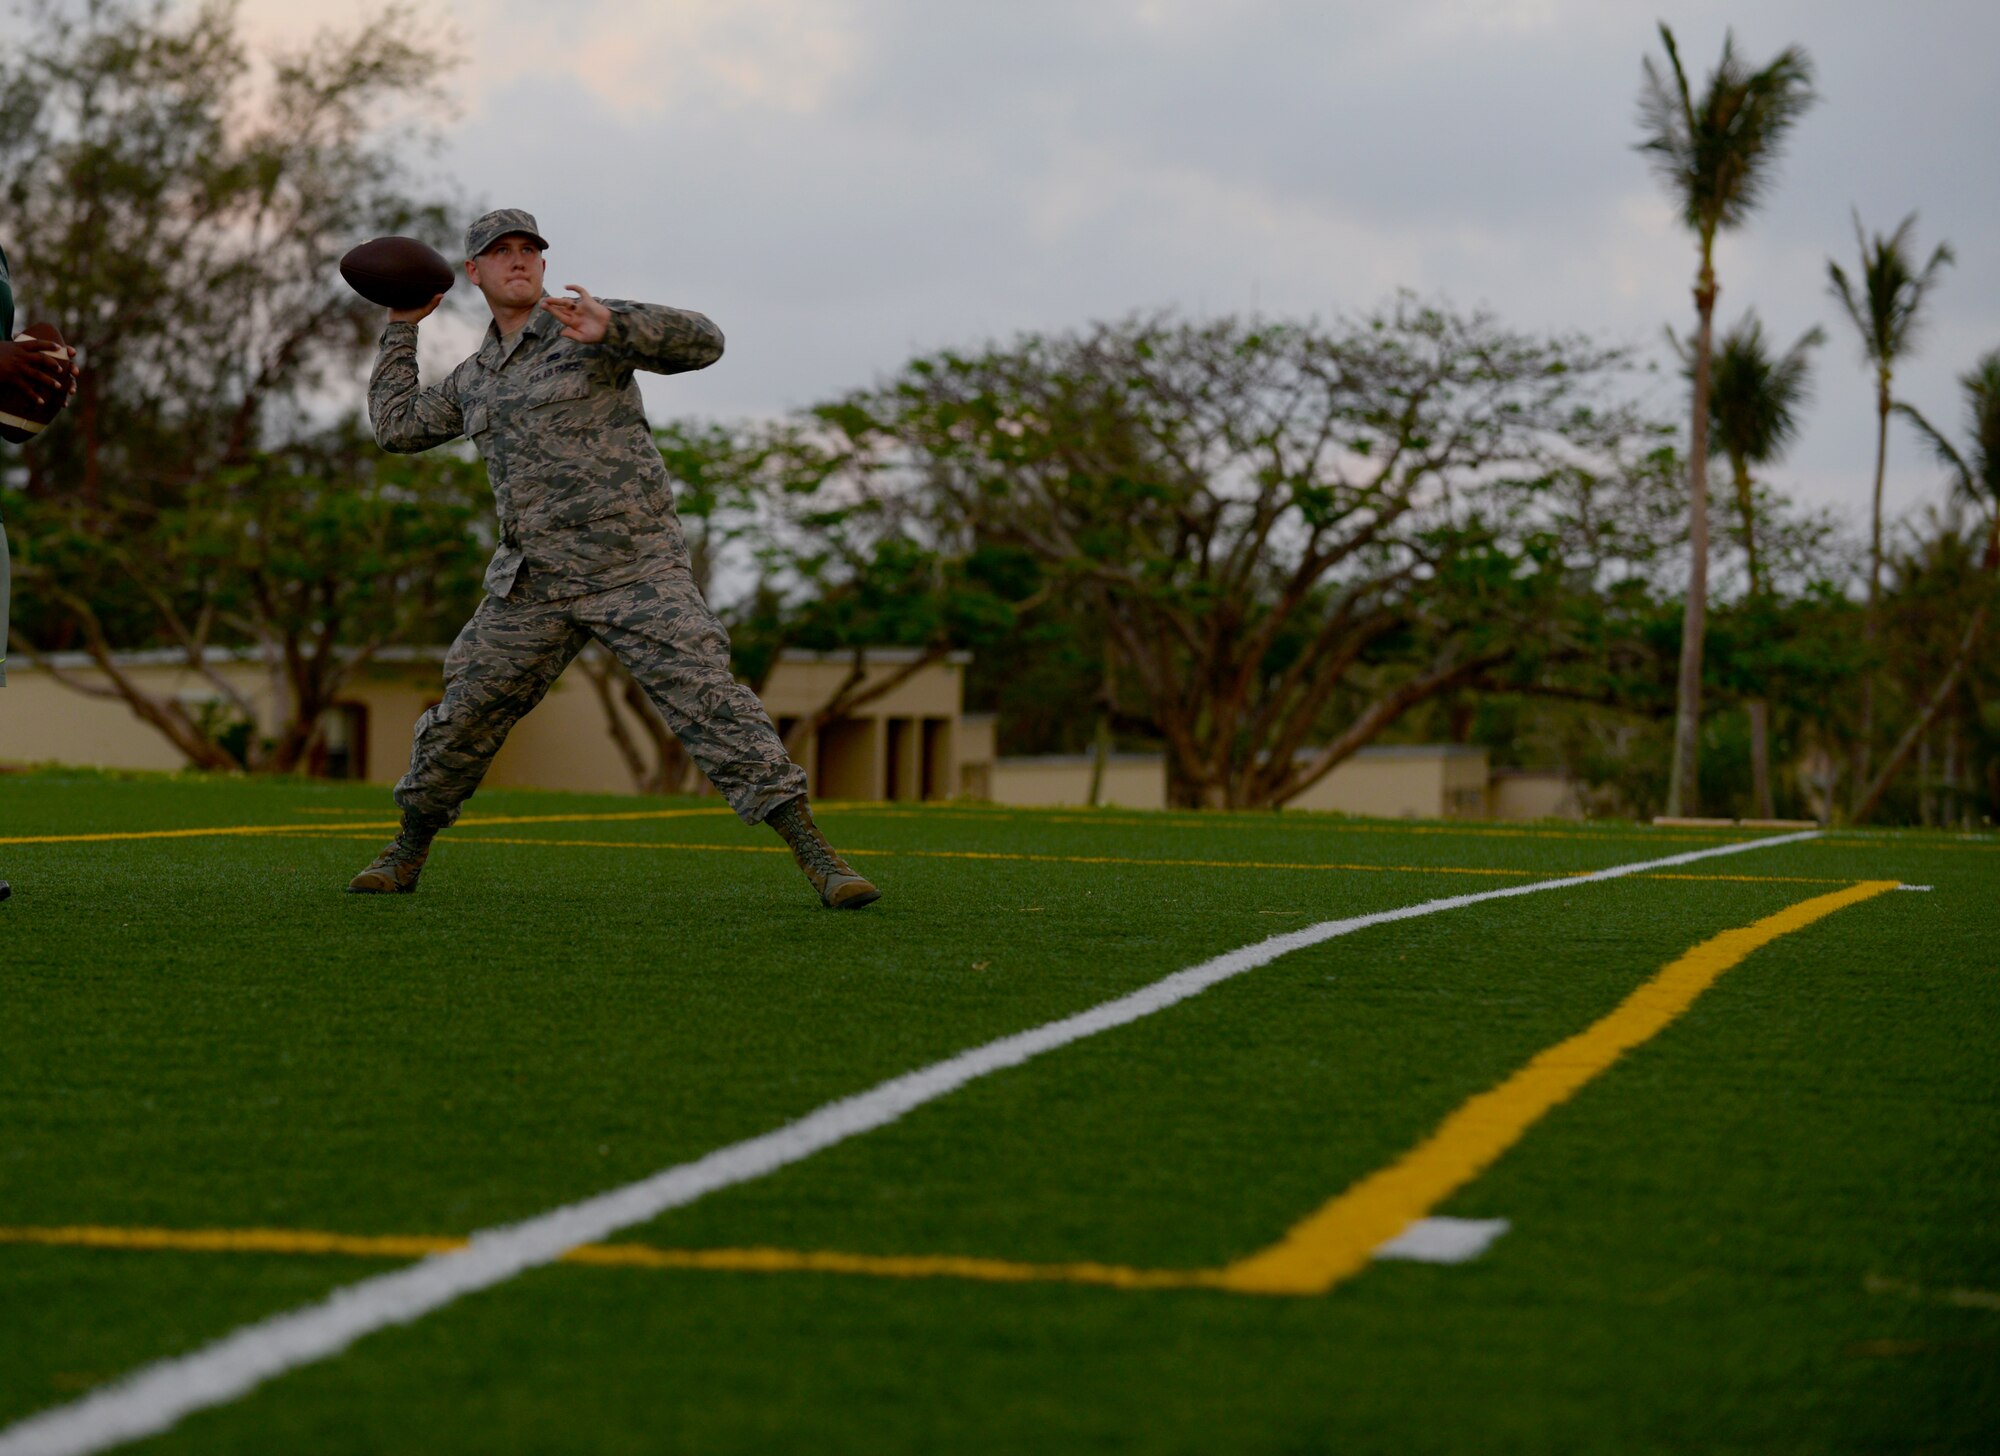 Senior Airman Presley Griffith, 36th Mobility Response Squadron executive assistant, passes a football June 6, 2015, at Andersen Air Force Base, Guam. Griffith created a free spring practice camp as volunteer coach and is working to become a history teacher and high school football coach. (U.S. Air Force photo by Senior Airman Alexander W. Riedel/Released)